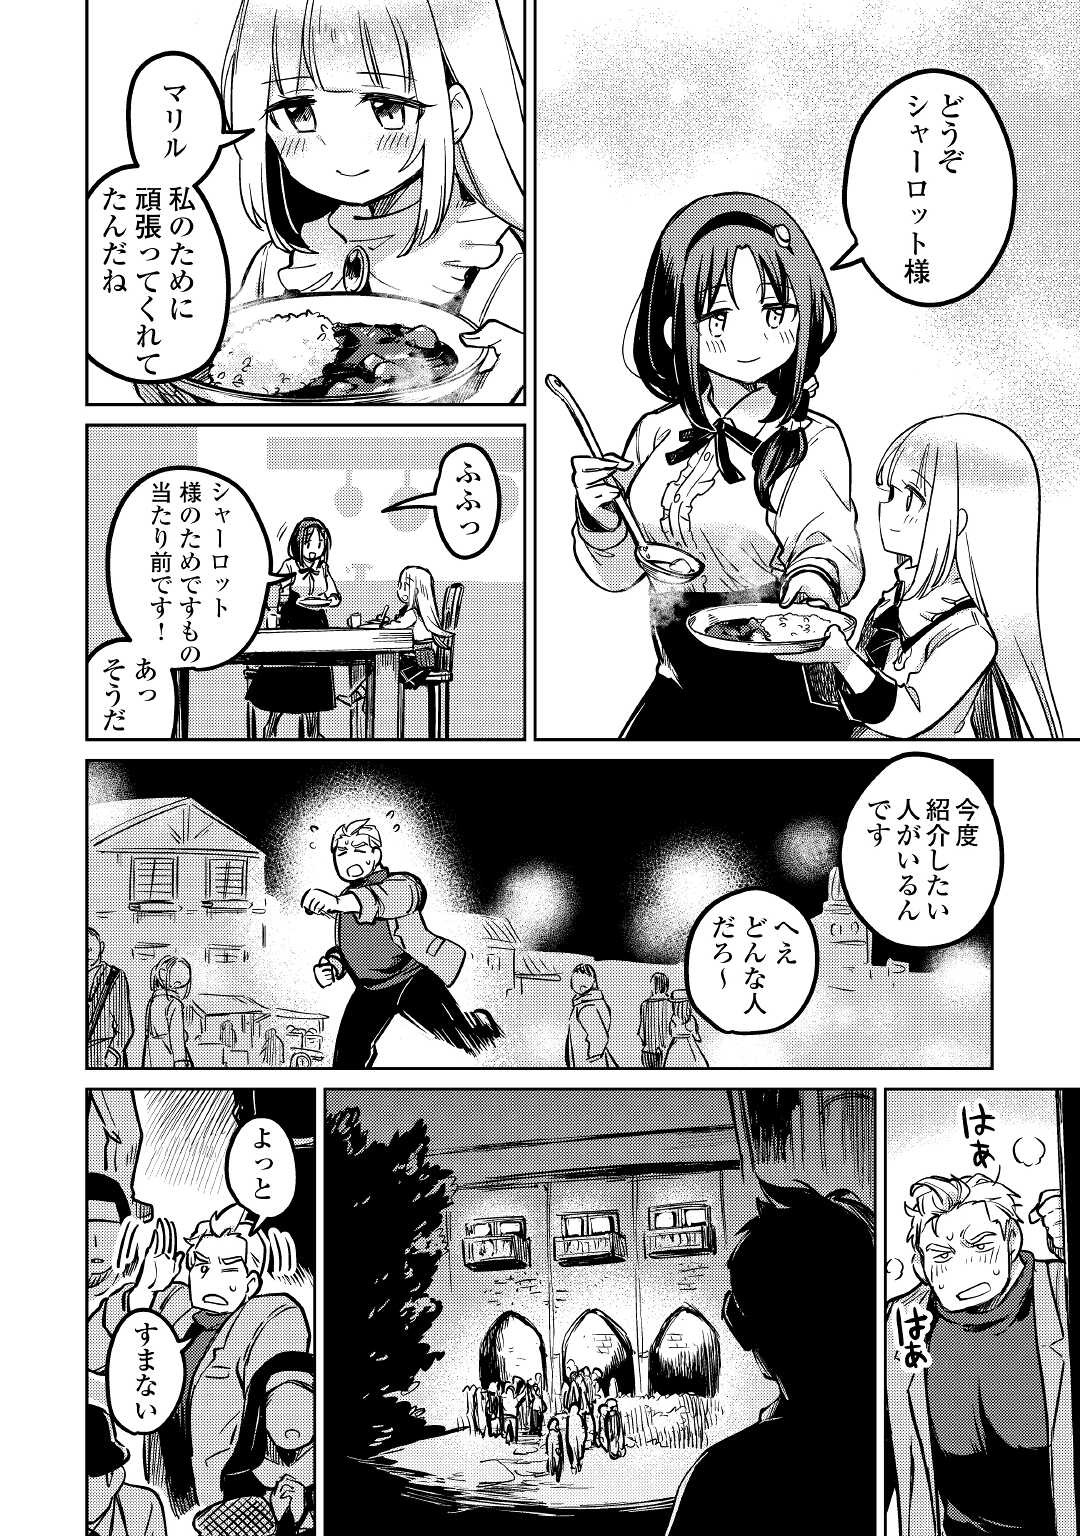 The Former Structural Researcher’s Story of Otherworldly Adventure 第41話 - Page 34